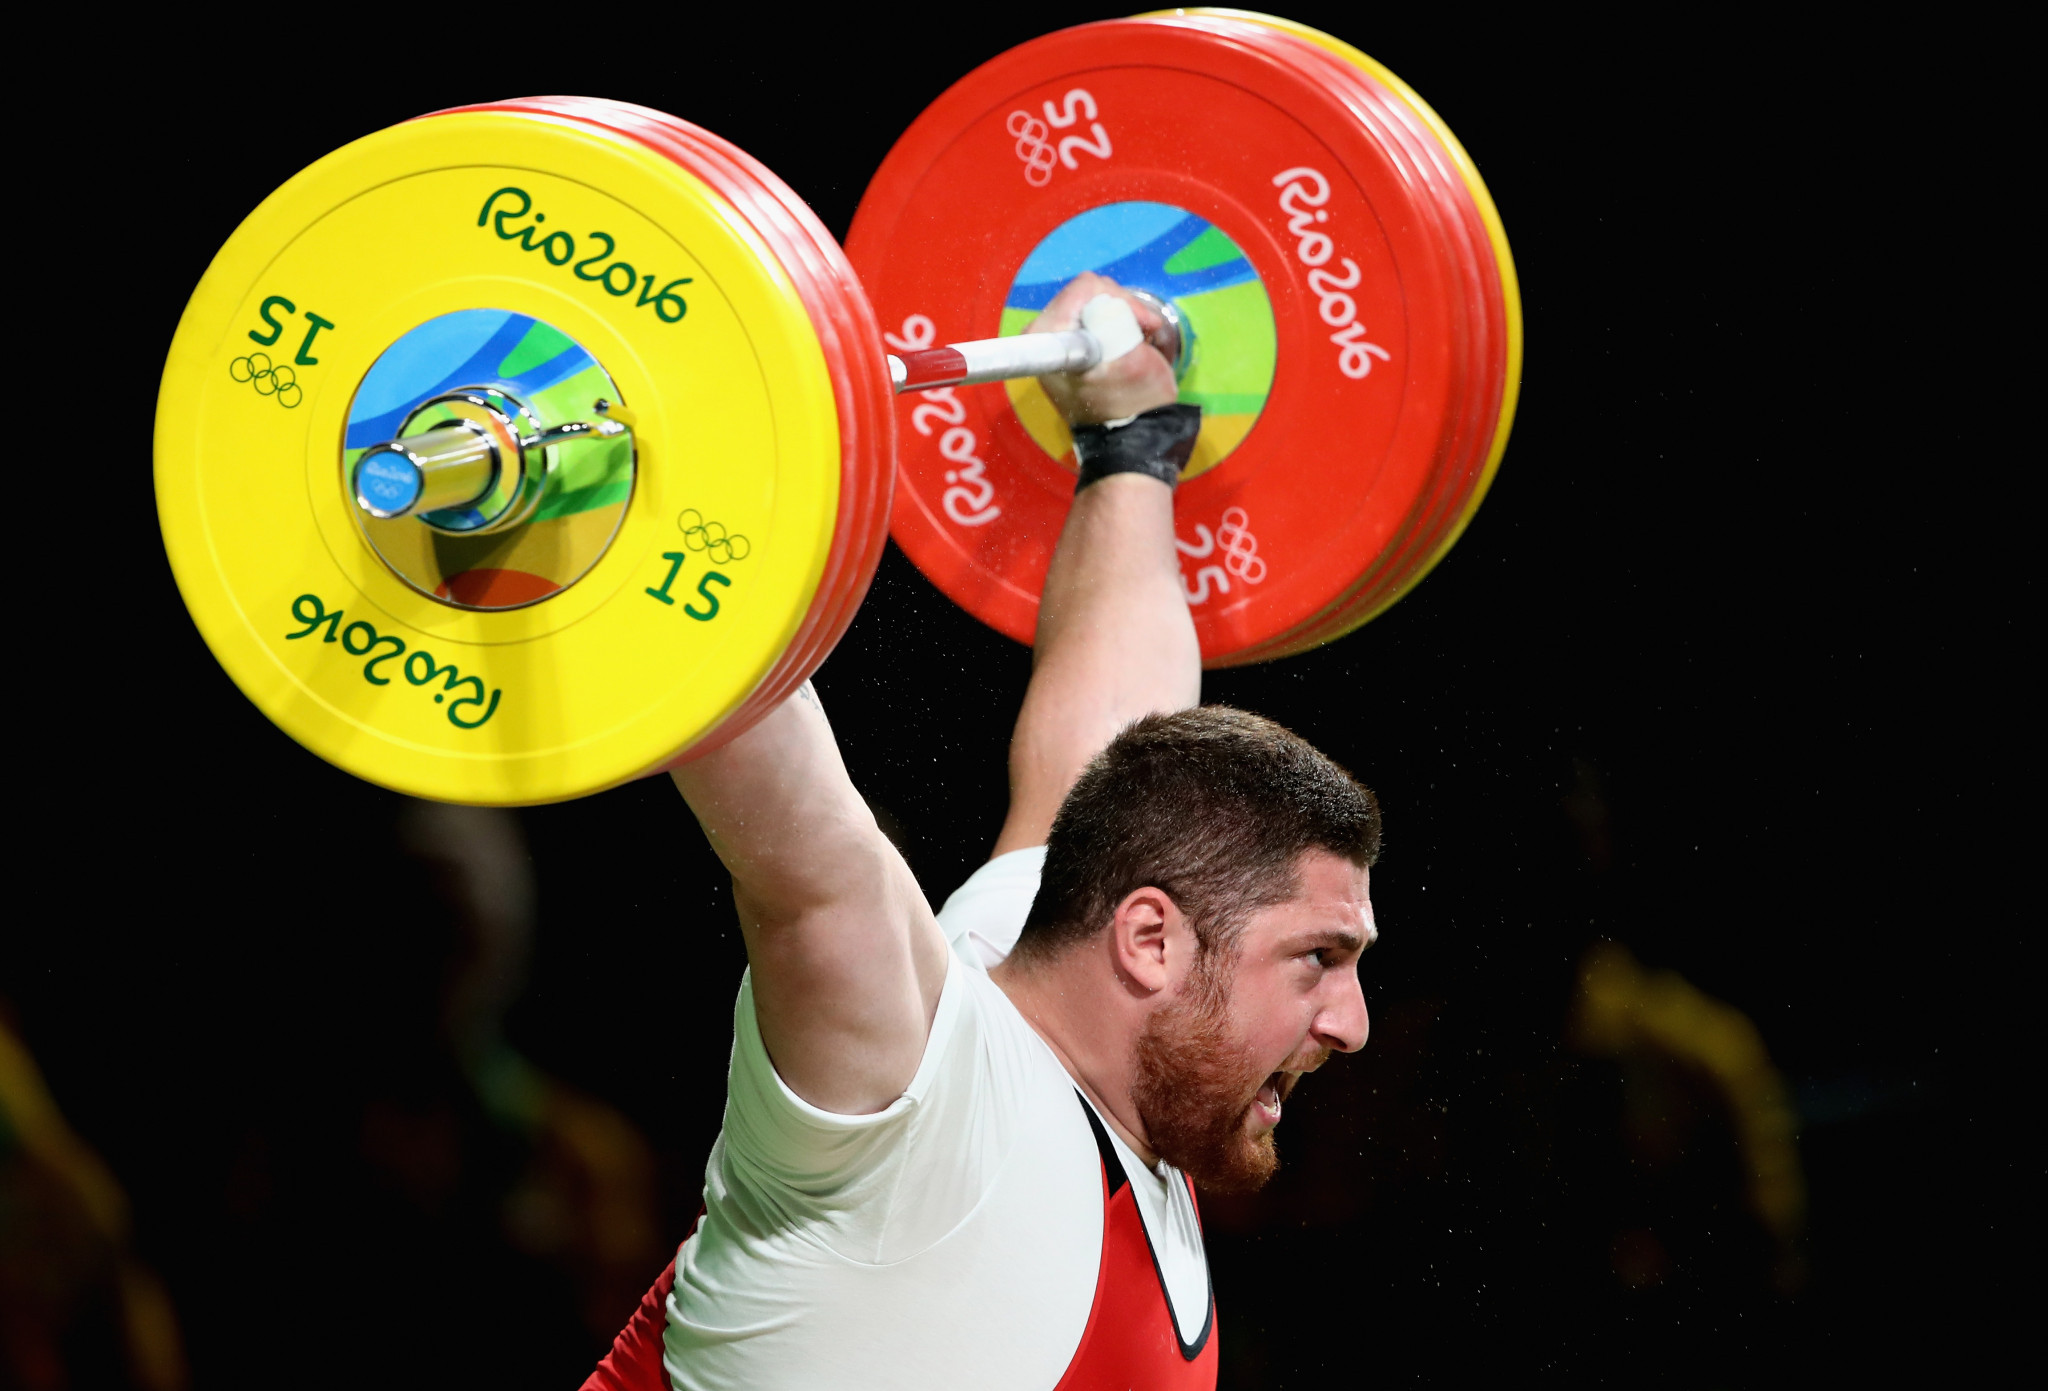 Georgia's Lasha Talakhadze was Kianoush Rostami's closest rival for the title of male Weightlifter of the Year ©Getty Images